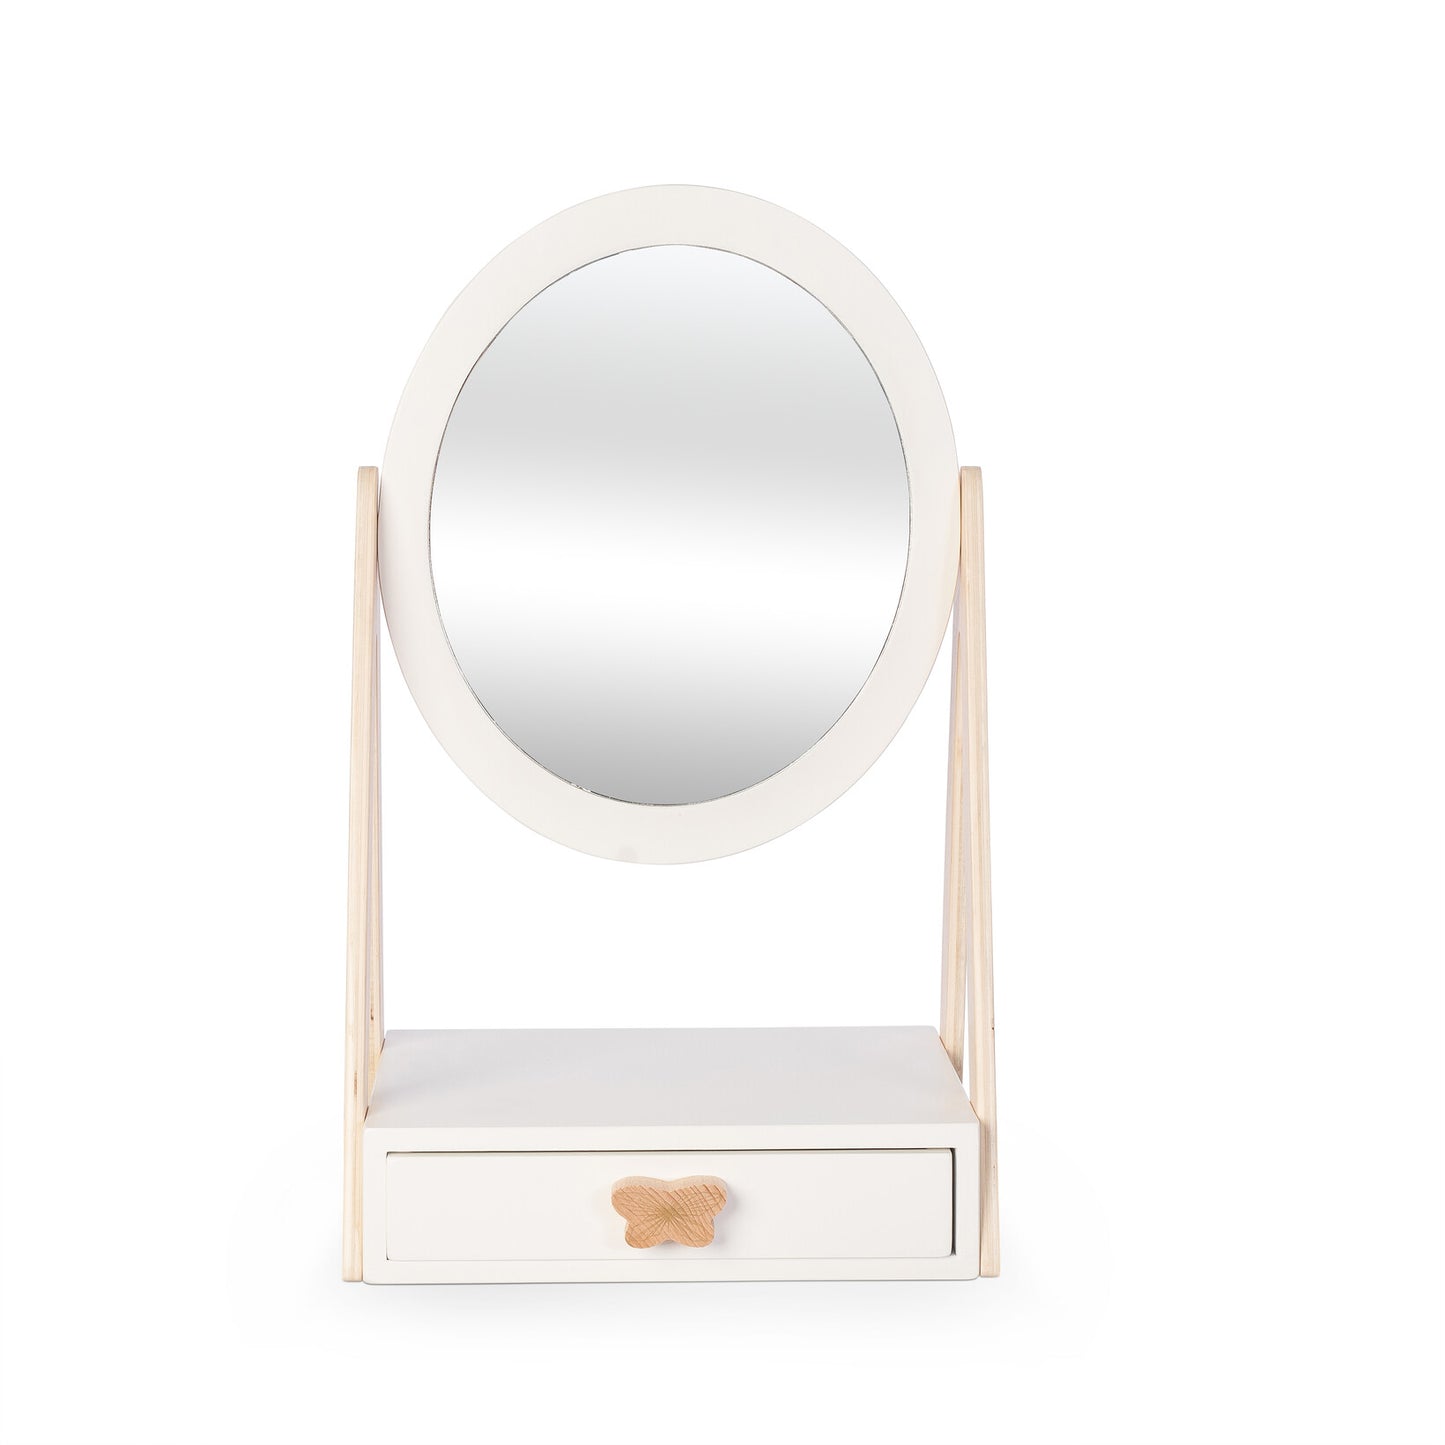 Wooden Play Table Mirror with Drawer